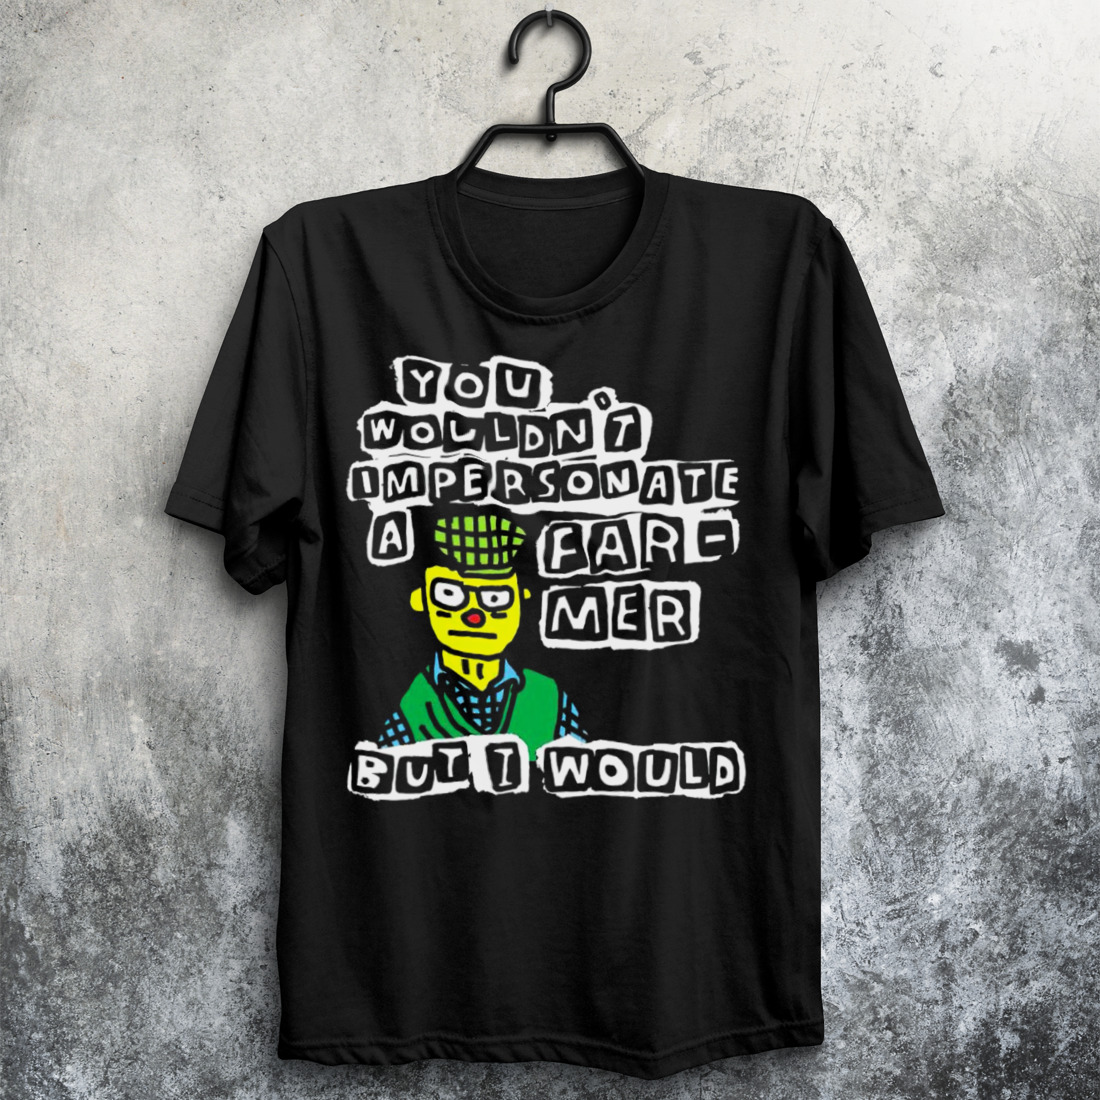 You wouldn’t im personate a far-mer butt would shirt